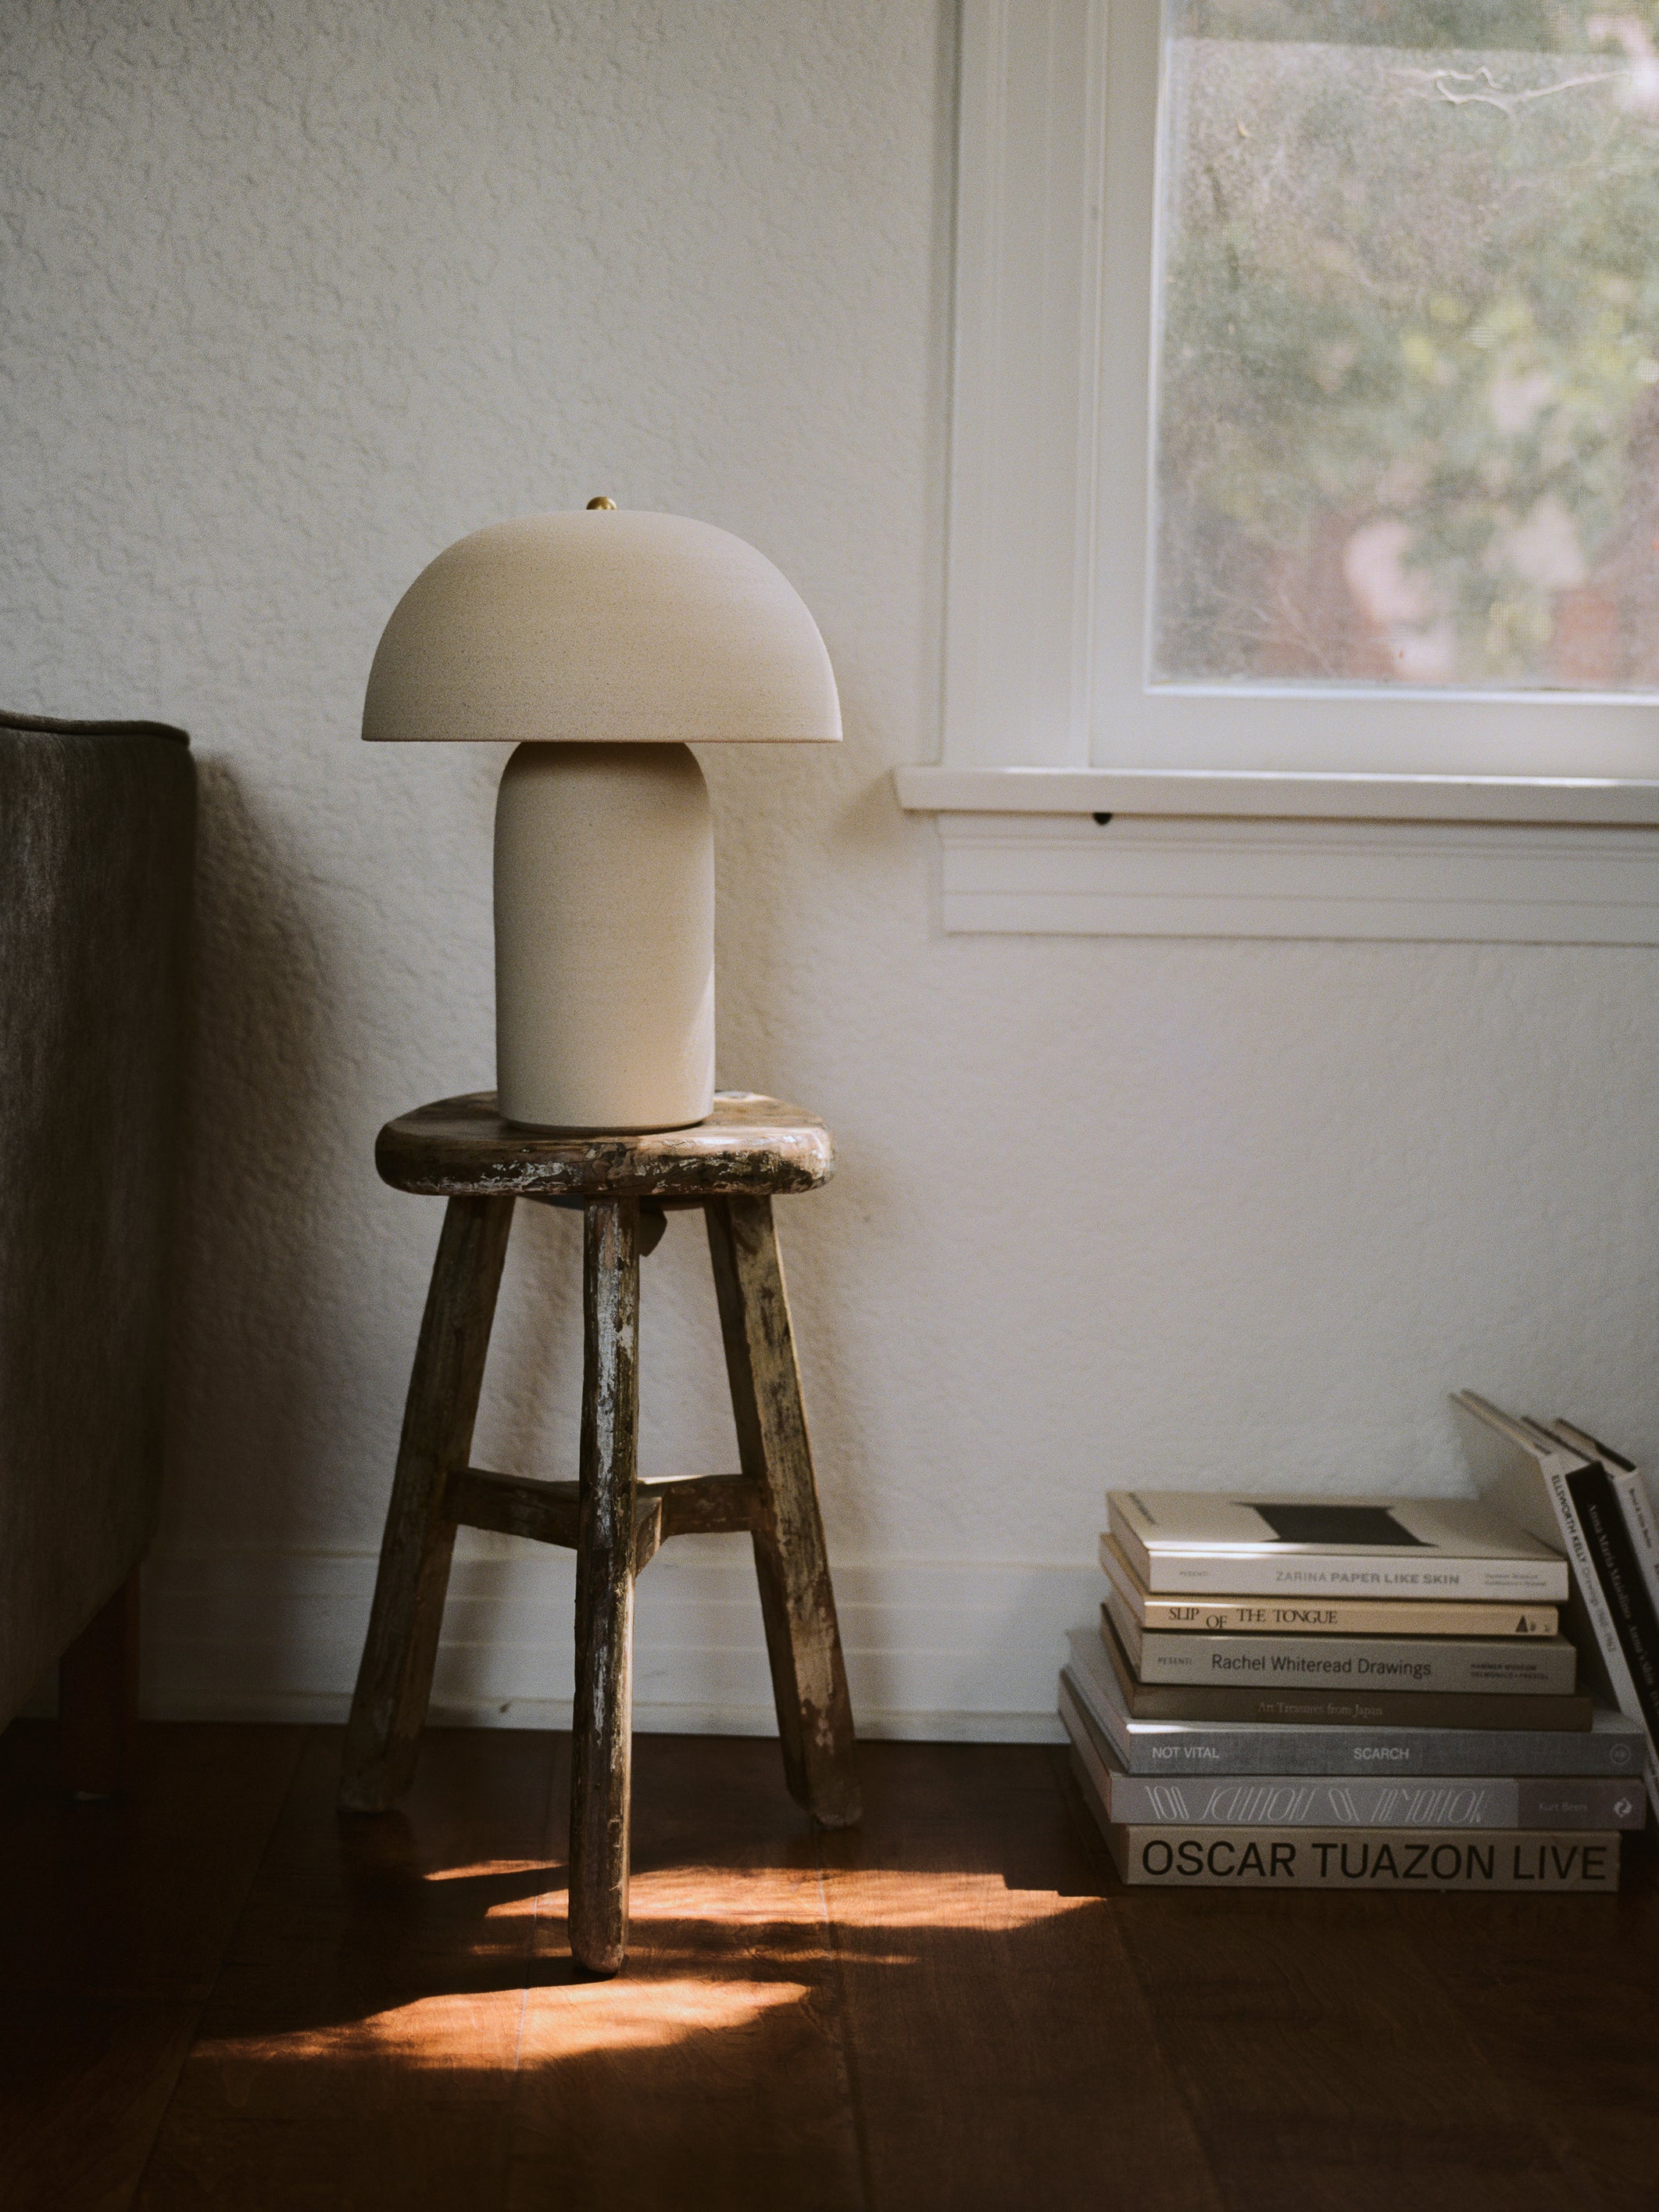 Ceramicah Tera Lamp Unglazed in Stone medium on side table with books